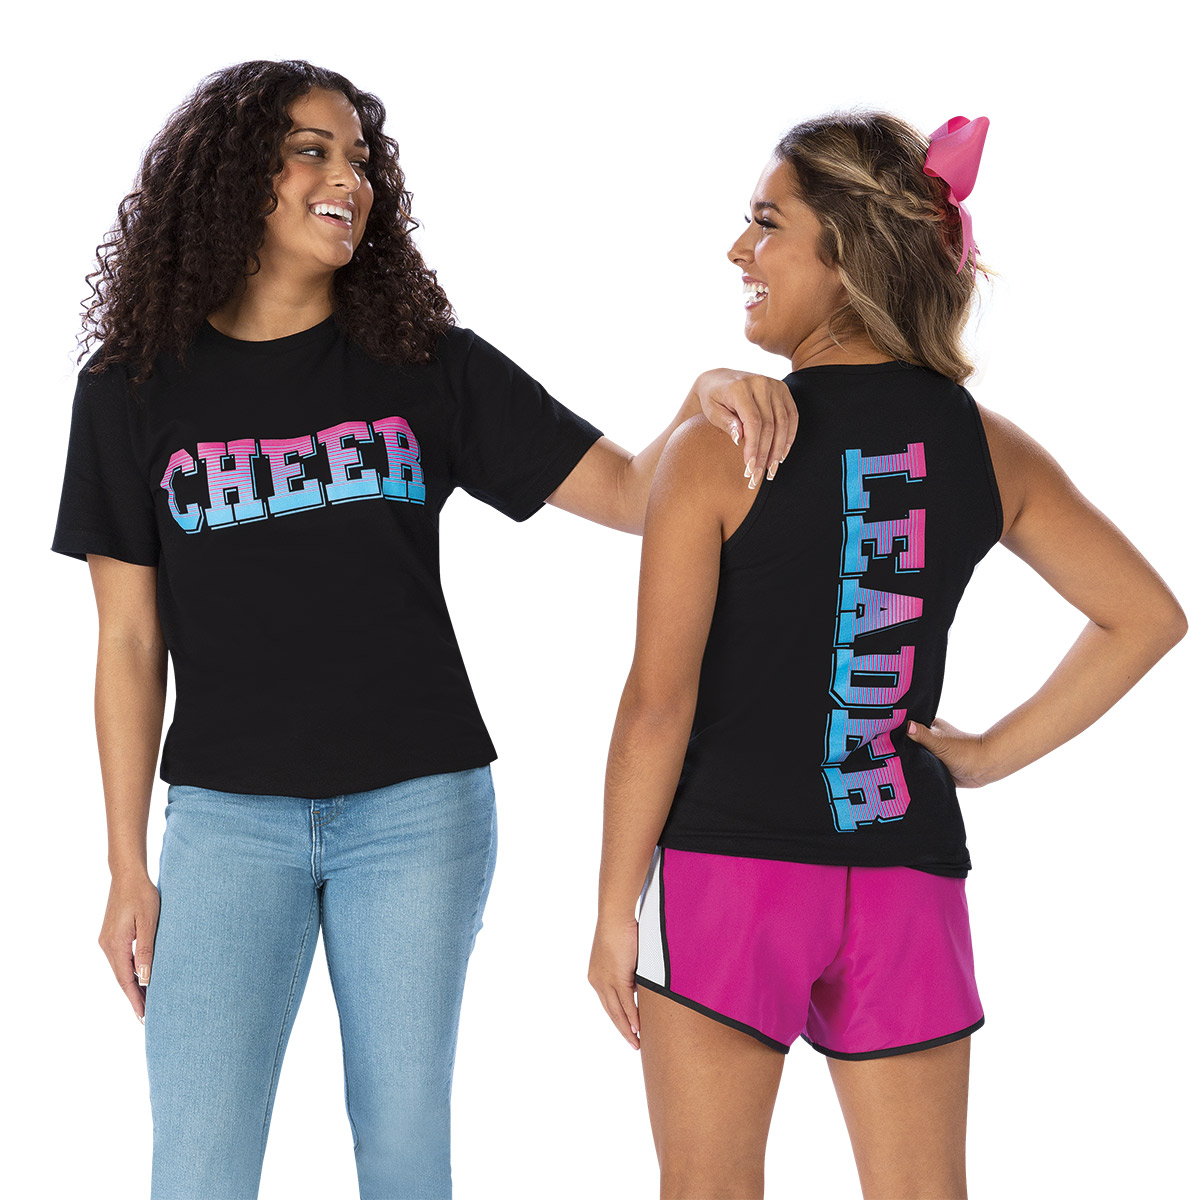 Cheer and Dance Shirts